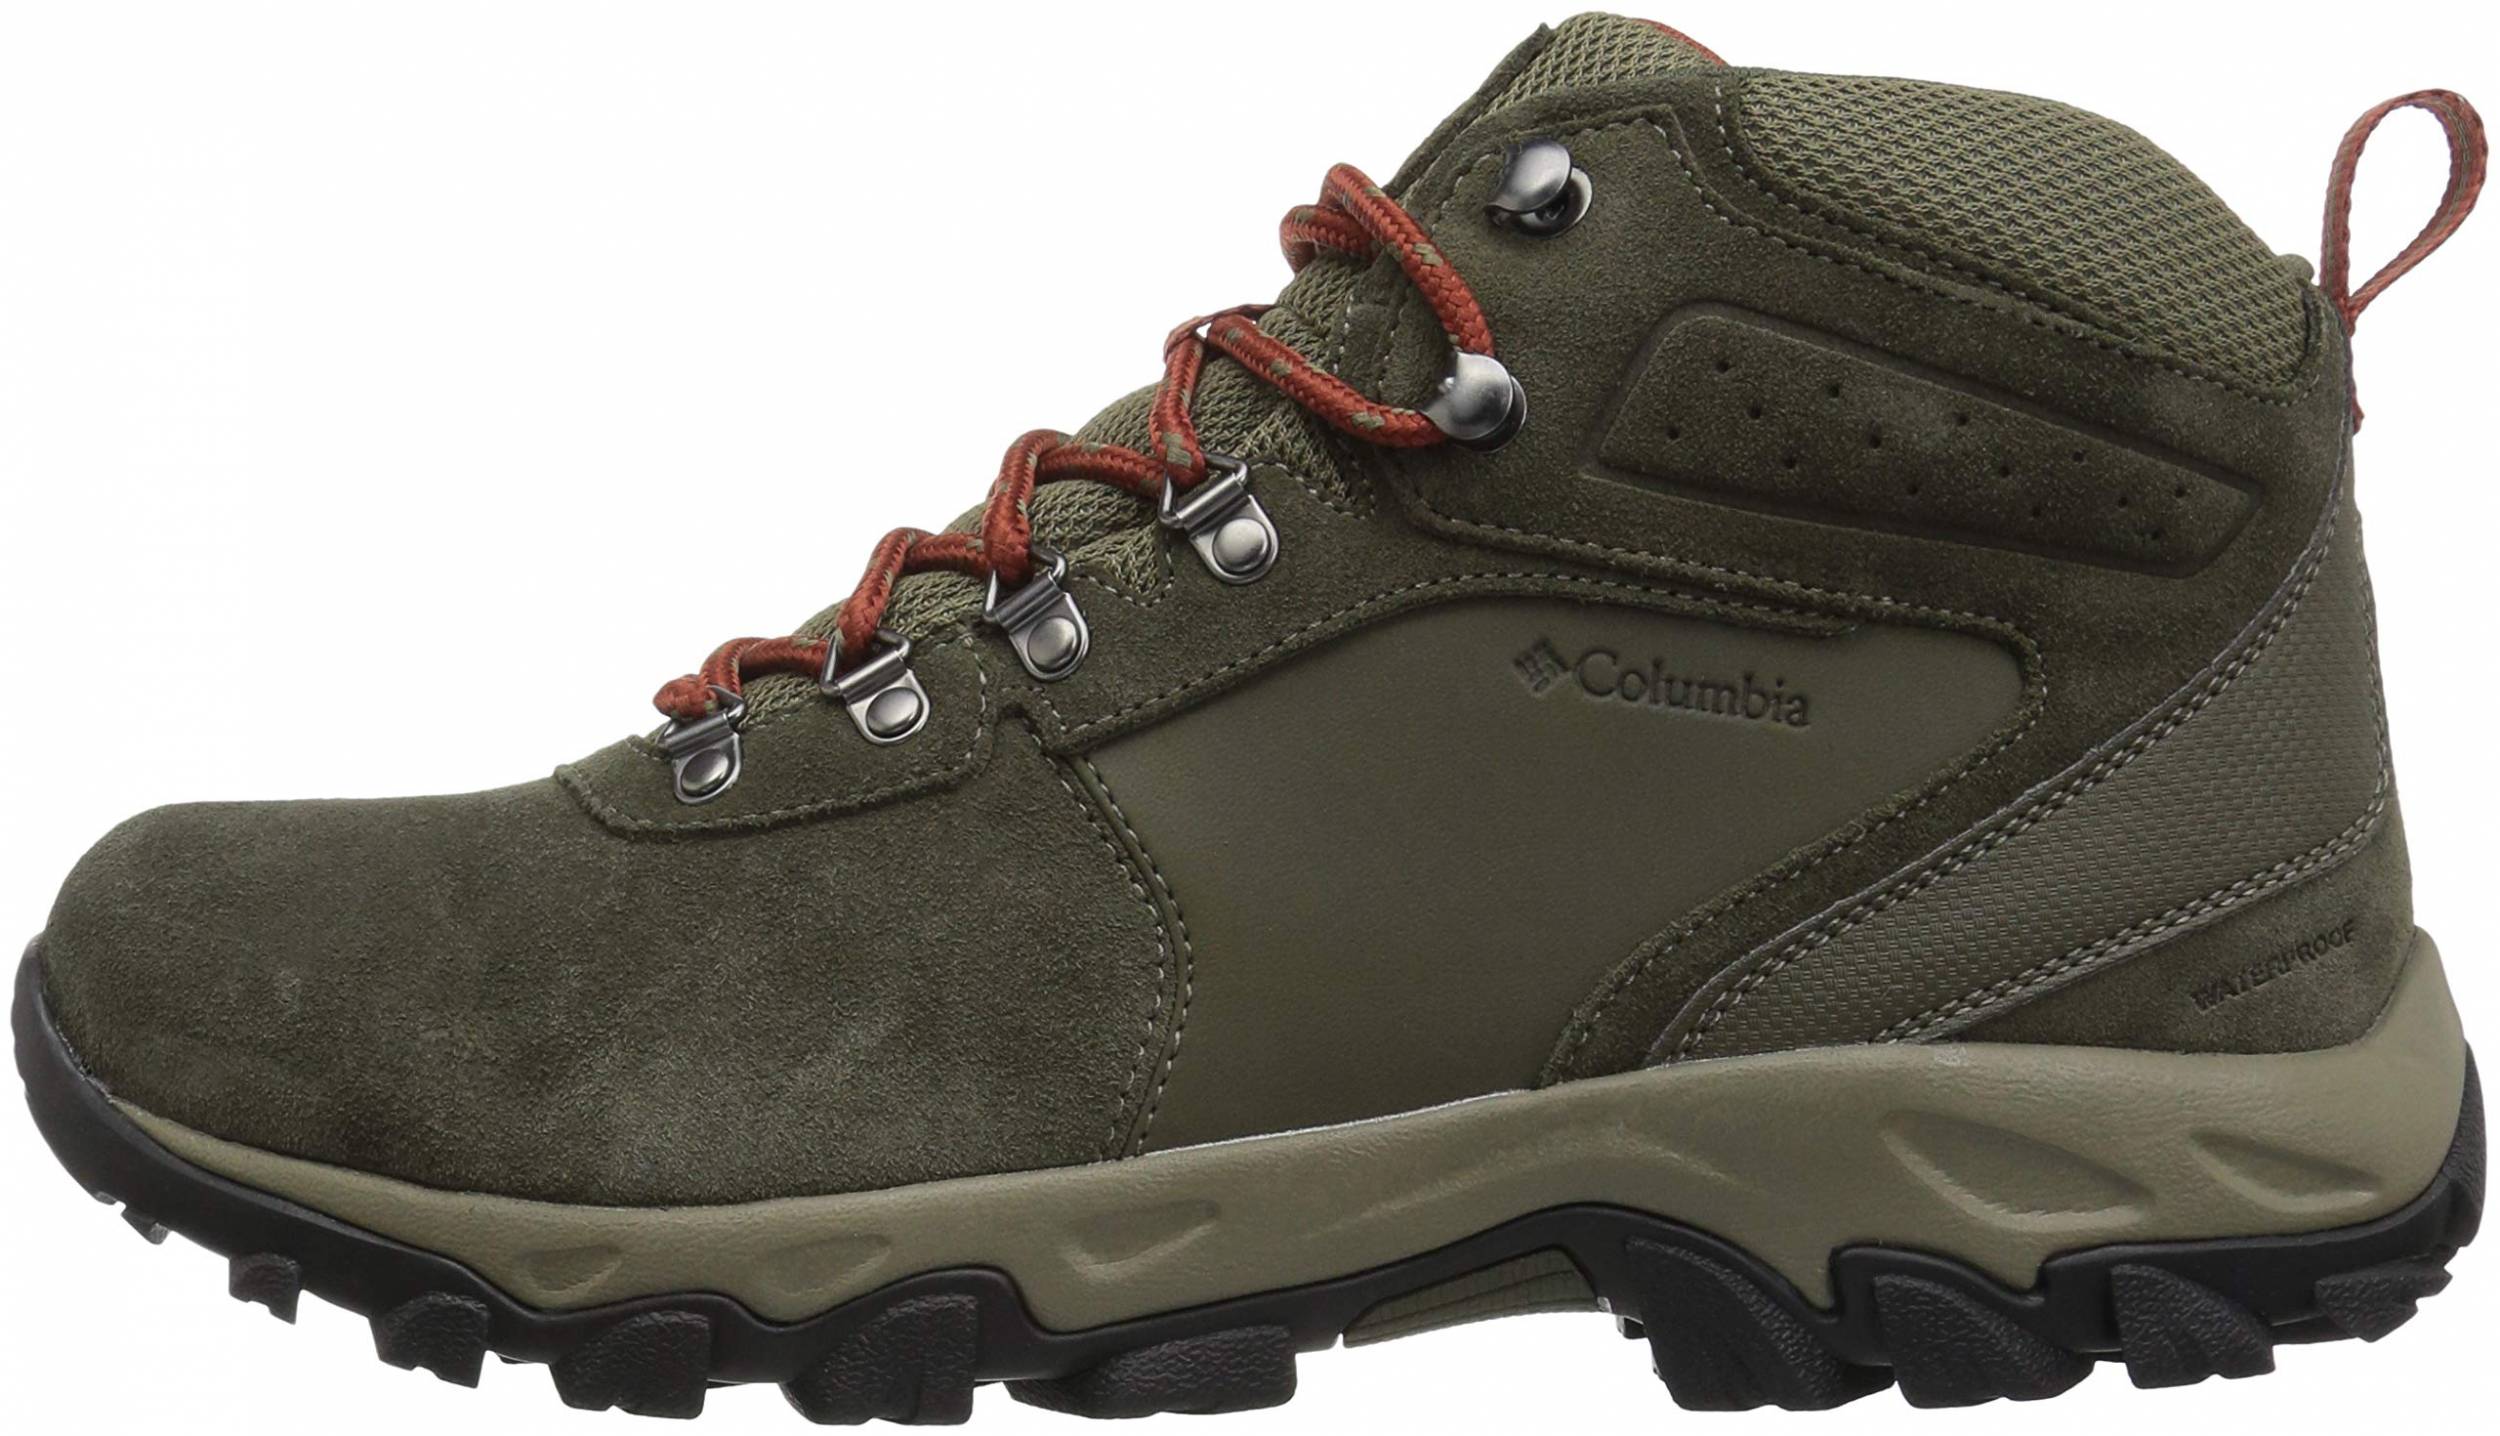 Save 26% on Wide Hiking Boots (98 